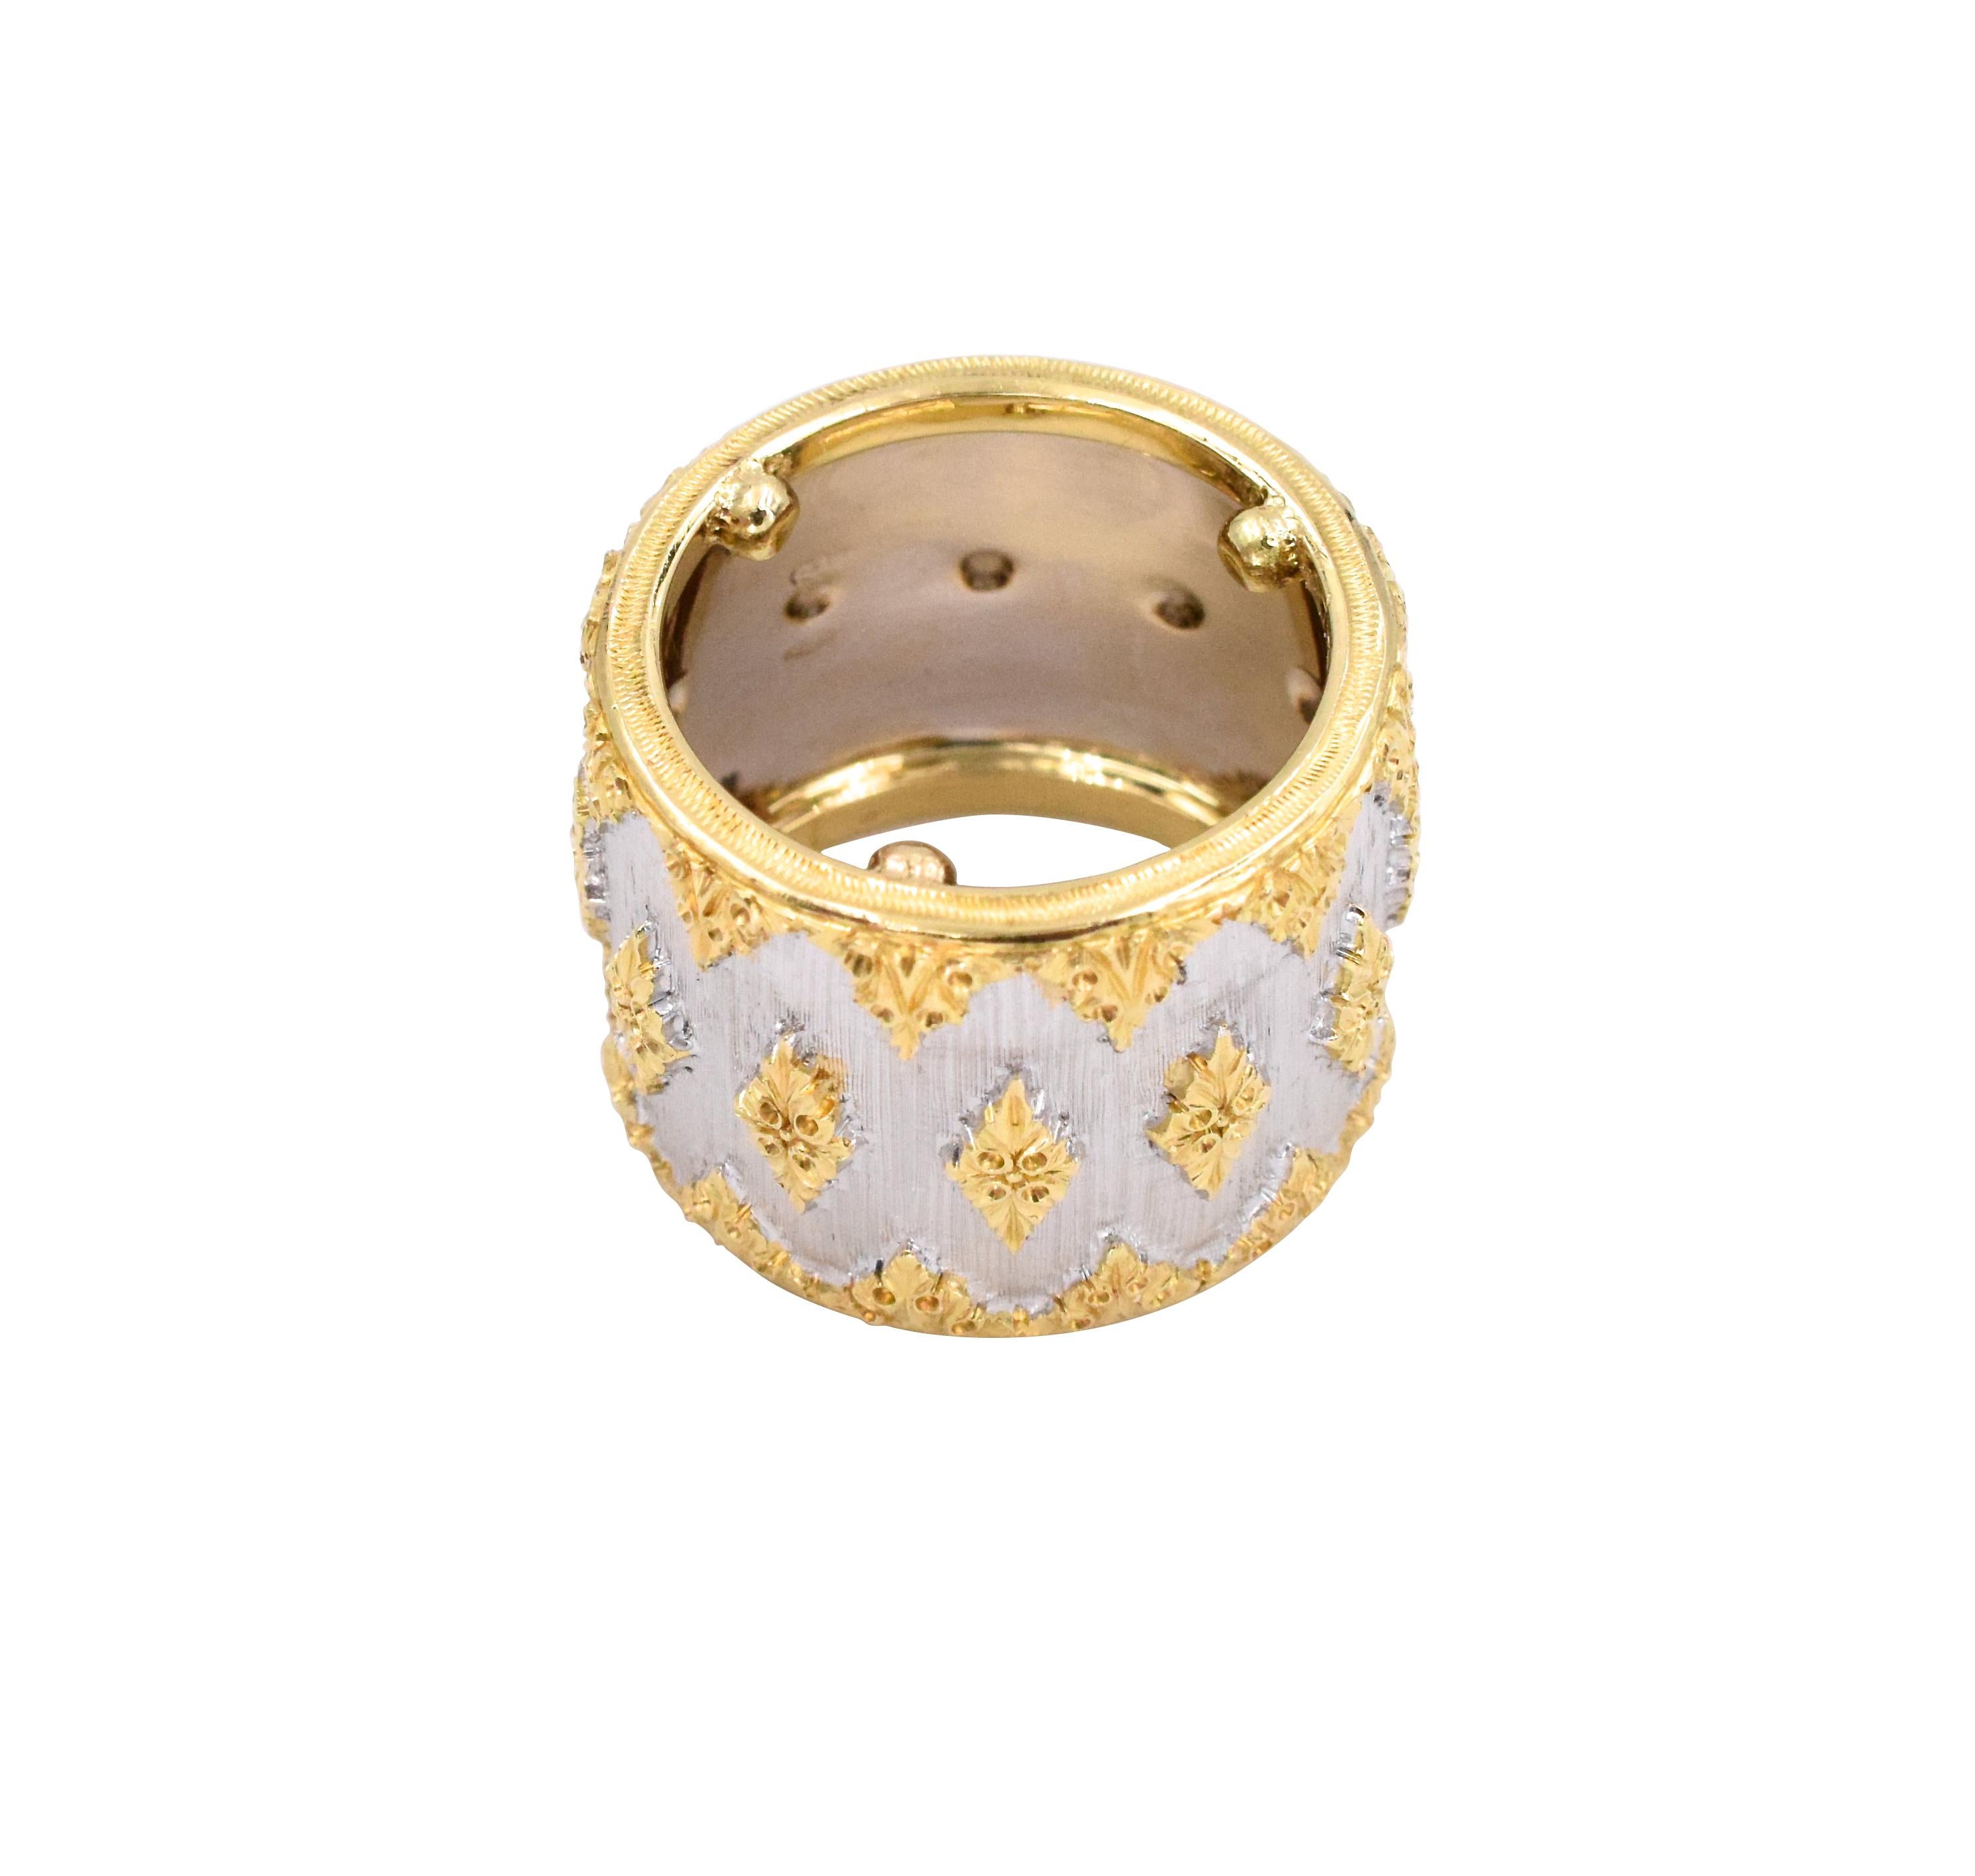 Buccellati Two Tone Gold Wedding Band. This wedding band has an intricate design with both 18k yellow and white gold
Signed: M.Buccellati  ( Mario Buccellati)
Width is 17.25 mm
Ring size is 71/4